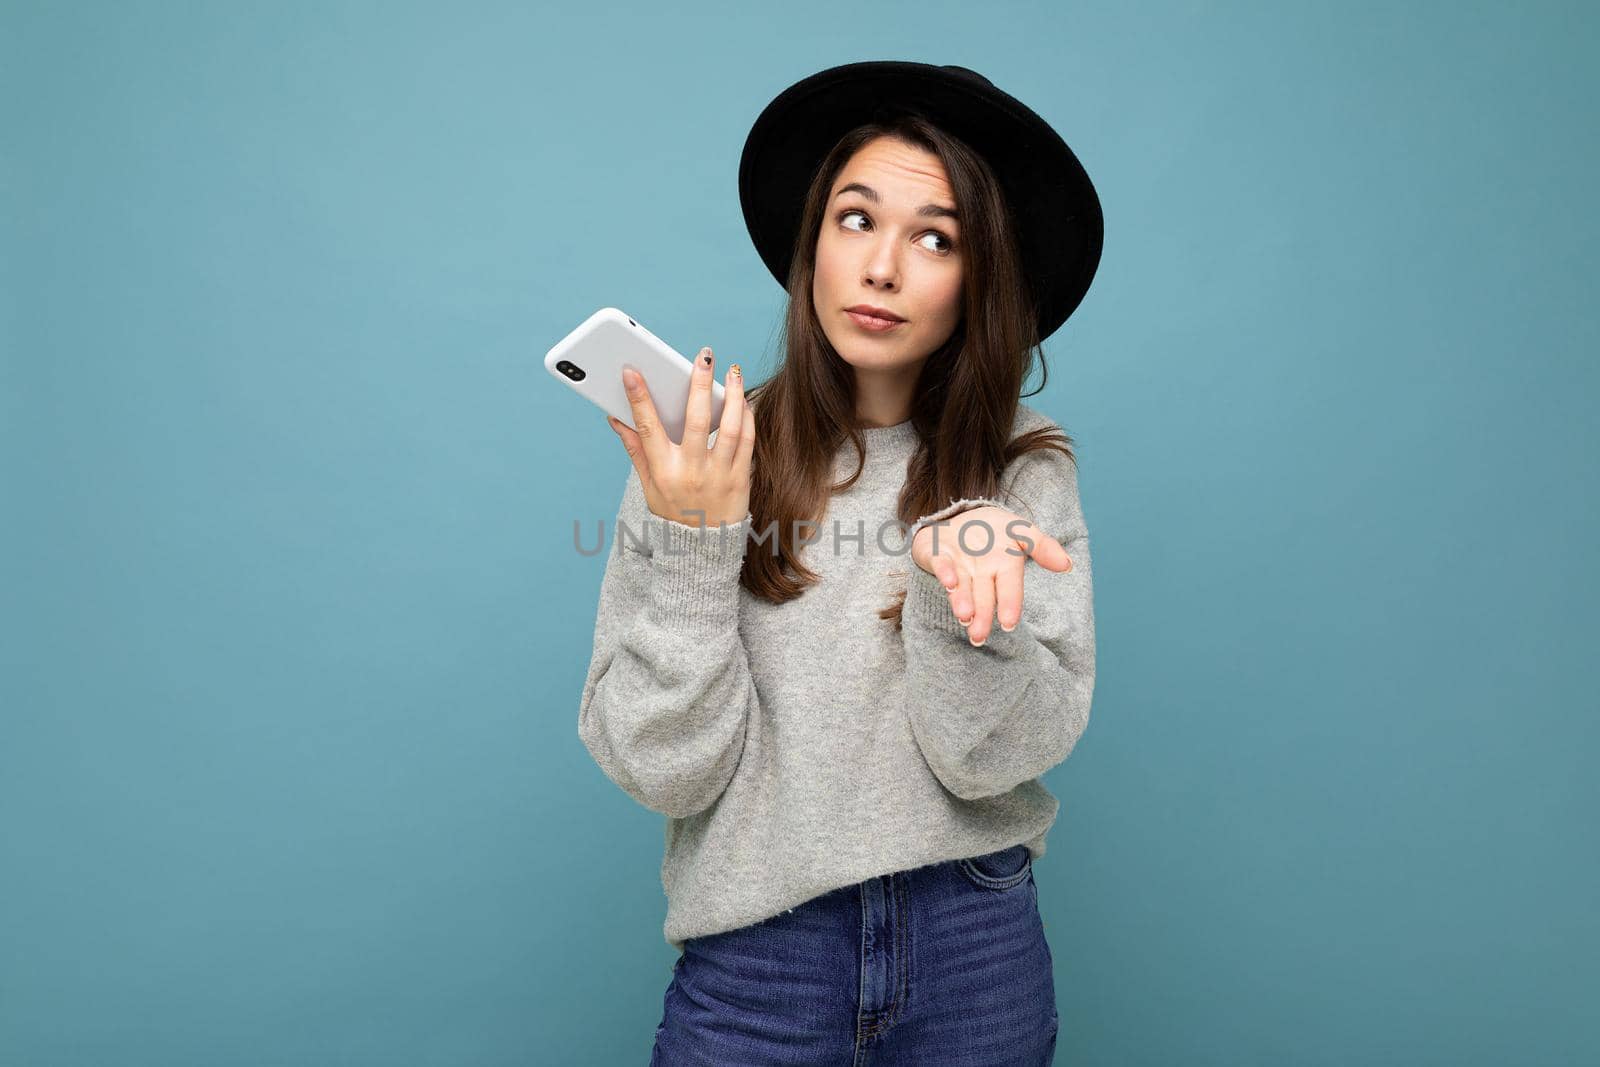 young asking dissatisfied brunette woman wearing black hat and grey sweater holding smartphone looking to the side isolated on background by TRMK